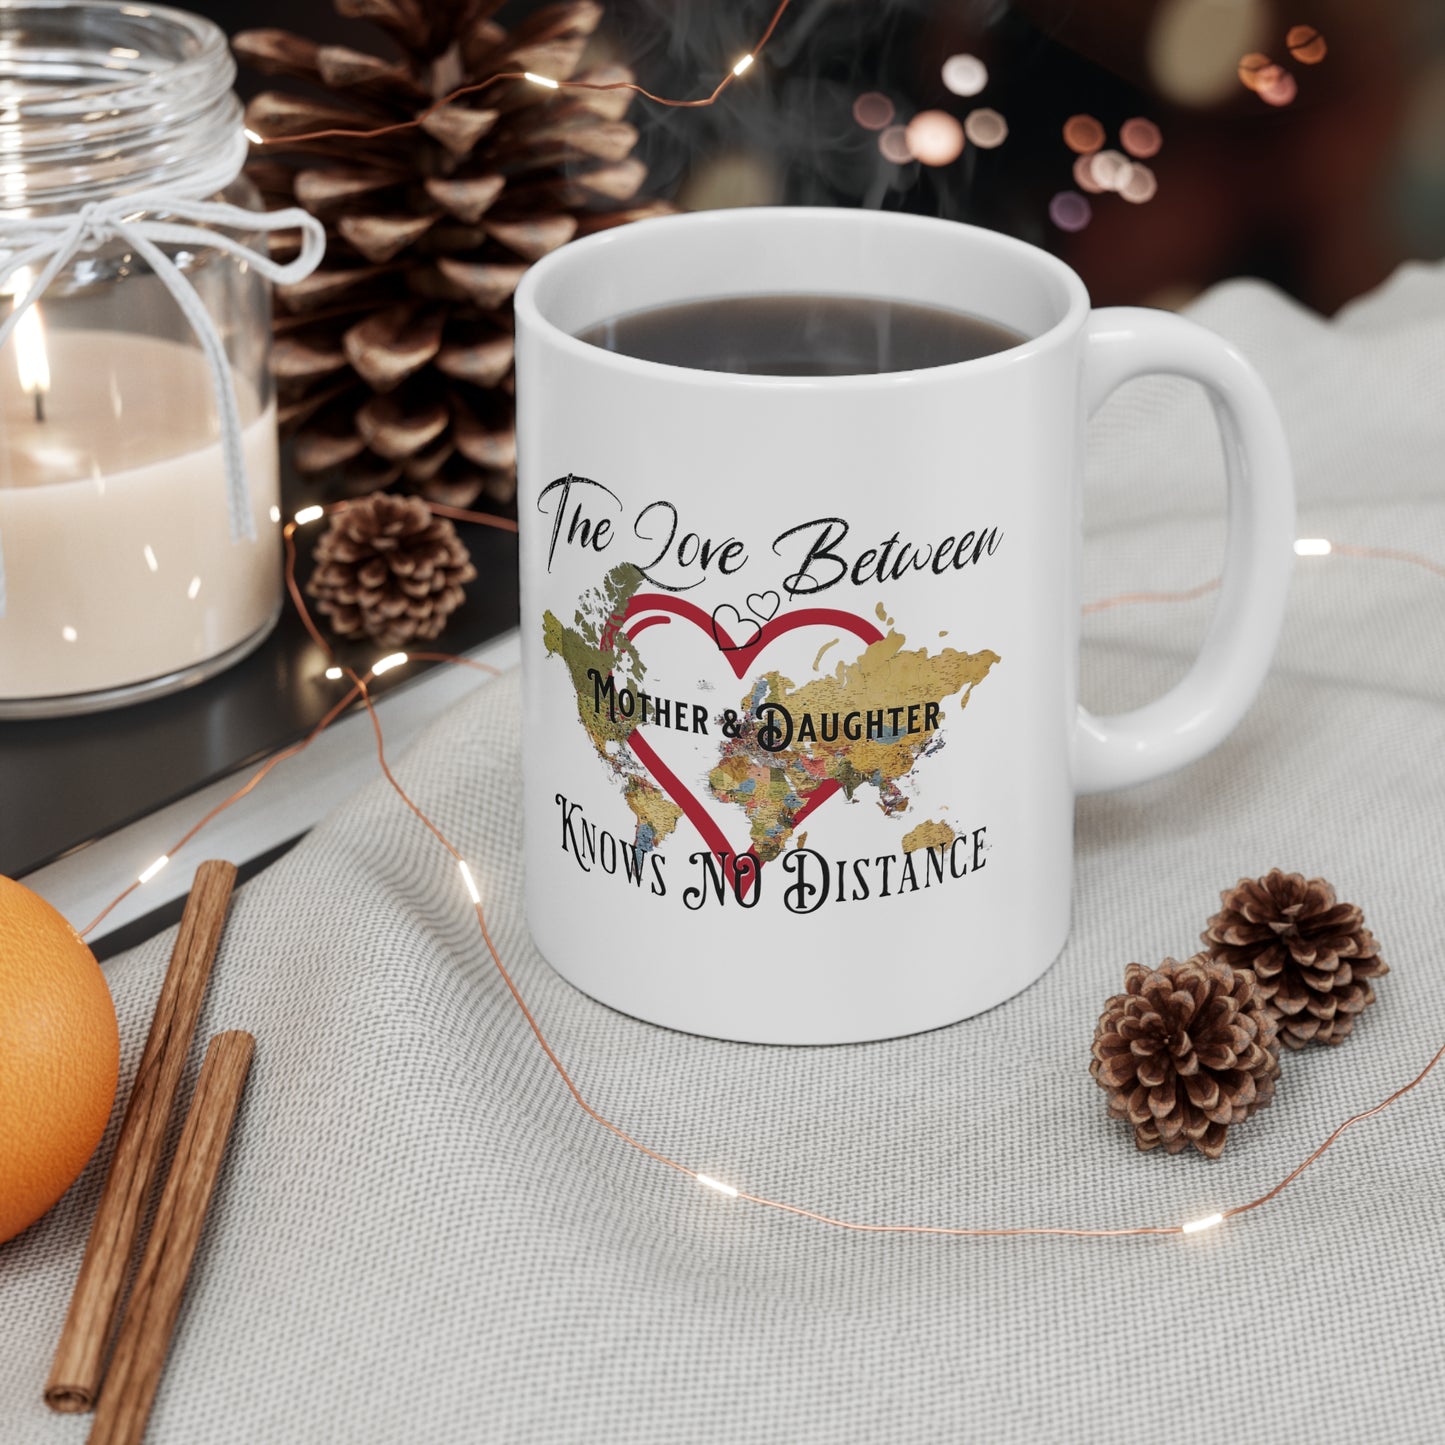 The love between mother and daughter knows no distance - Ceramic Mug 11oz